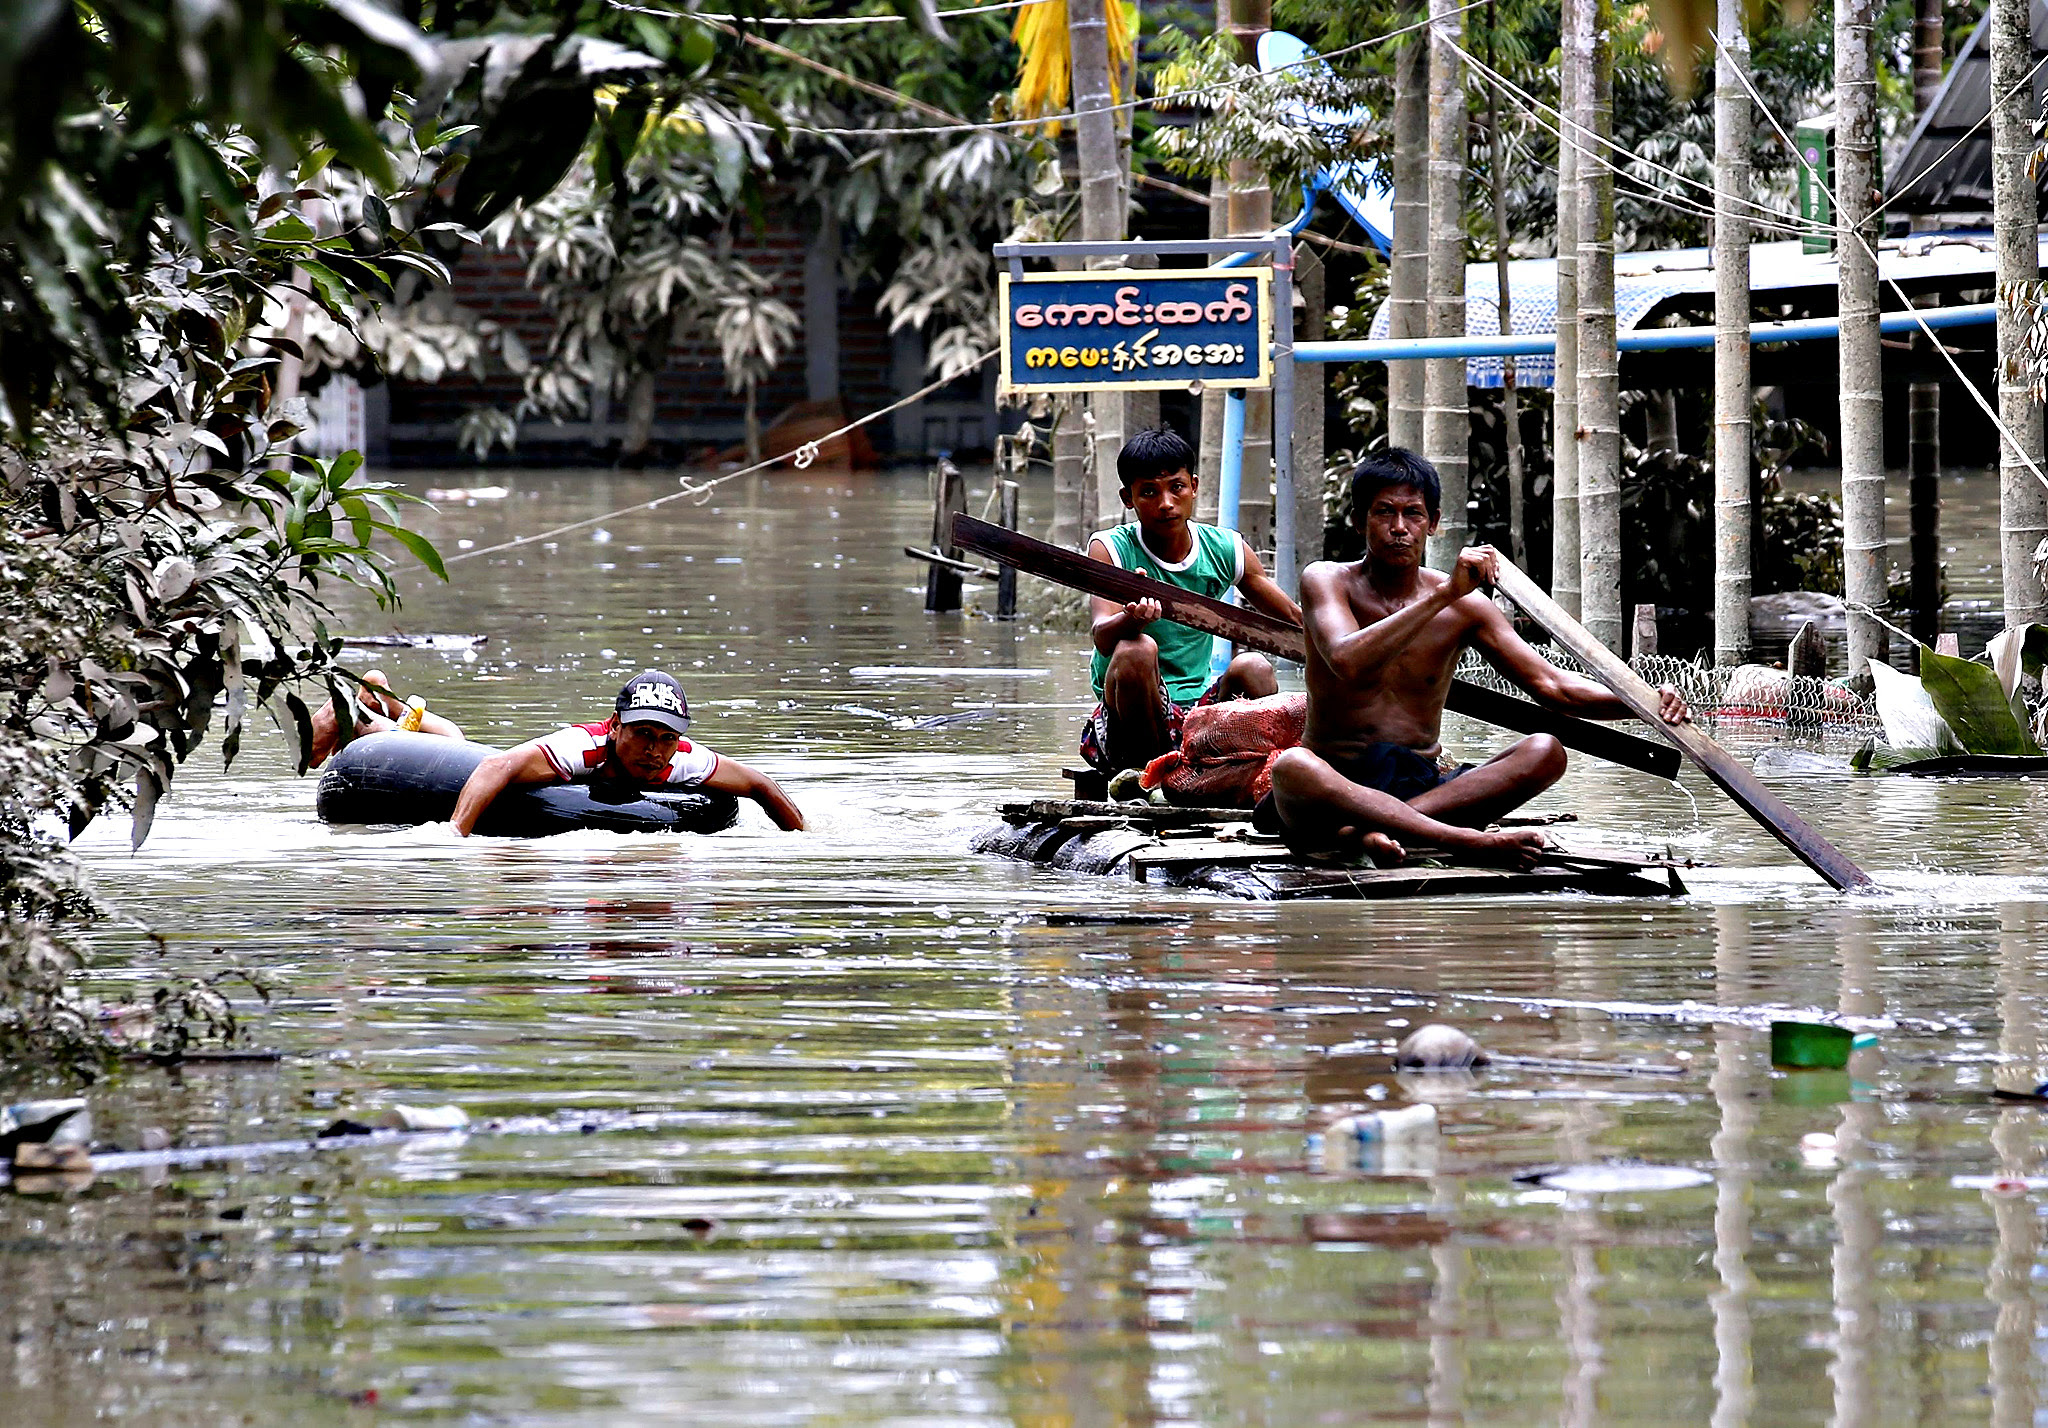 Locals use makeshift raft and rubber inner tube as a means of getting through  flooded road in Kale township of Sagaing Region, Myanmar on Monday. Myanmar president  declared four regions (Sagaing, Magway Regions and Rakhine, Chin States) as disaster zones on 31 July 2015. Heavy monsoon rains caused floods around Myanmar with dozens deaths being reported as thousands are fleeing their homes in several regions across the country. In Myanmar monsoon starts at the beginning of June and ends in September.